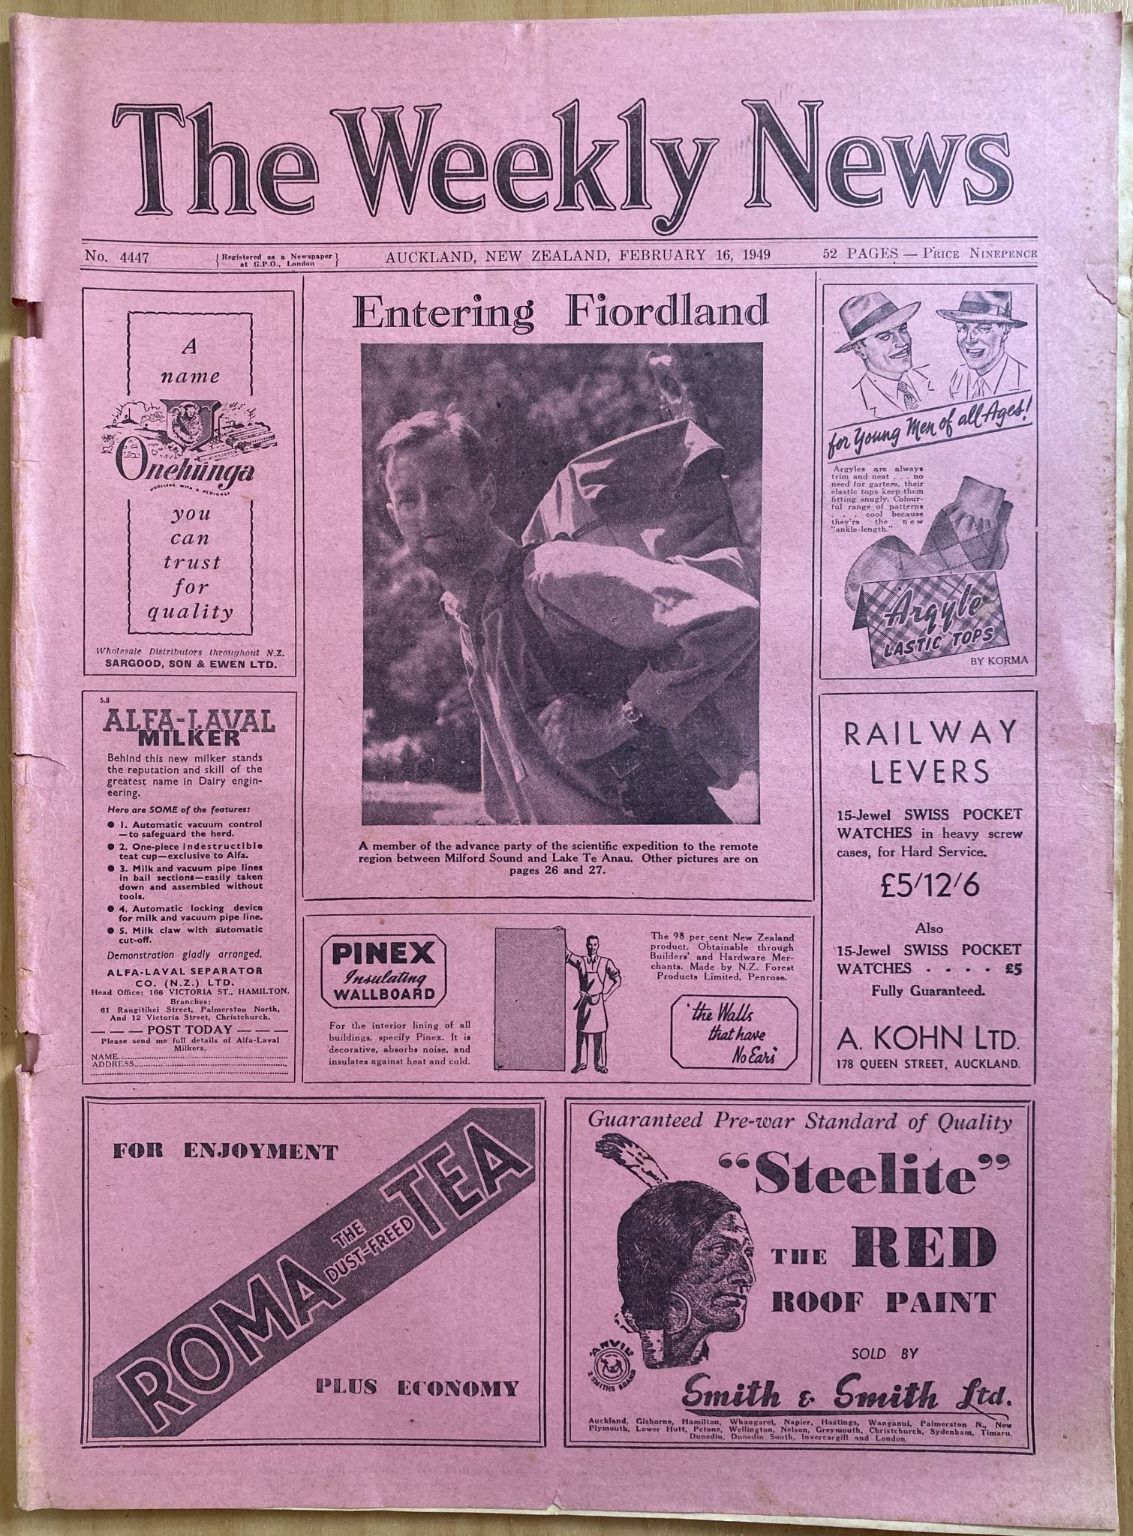 OLD NEWSPAPER: The Weekly News, No. 4447, 16 February 1949